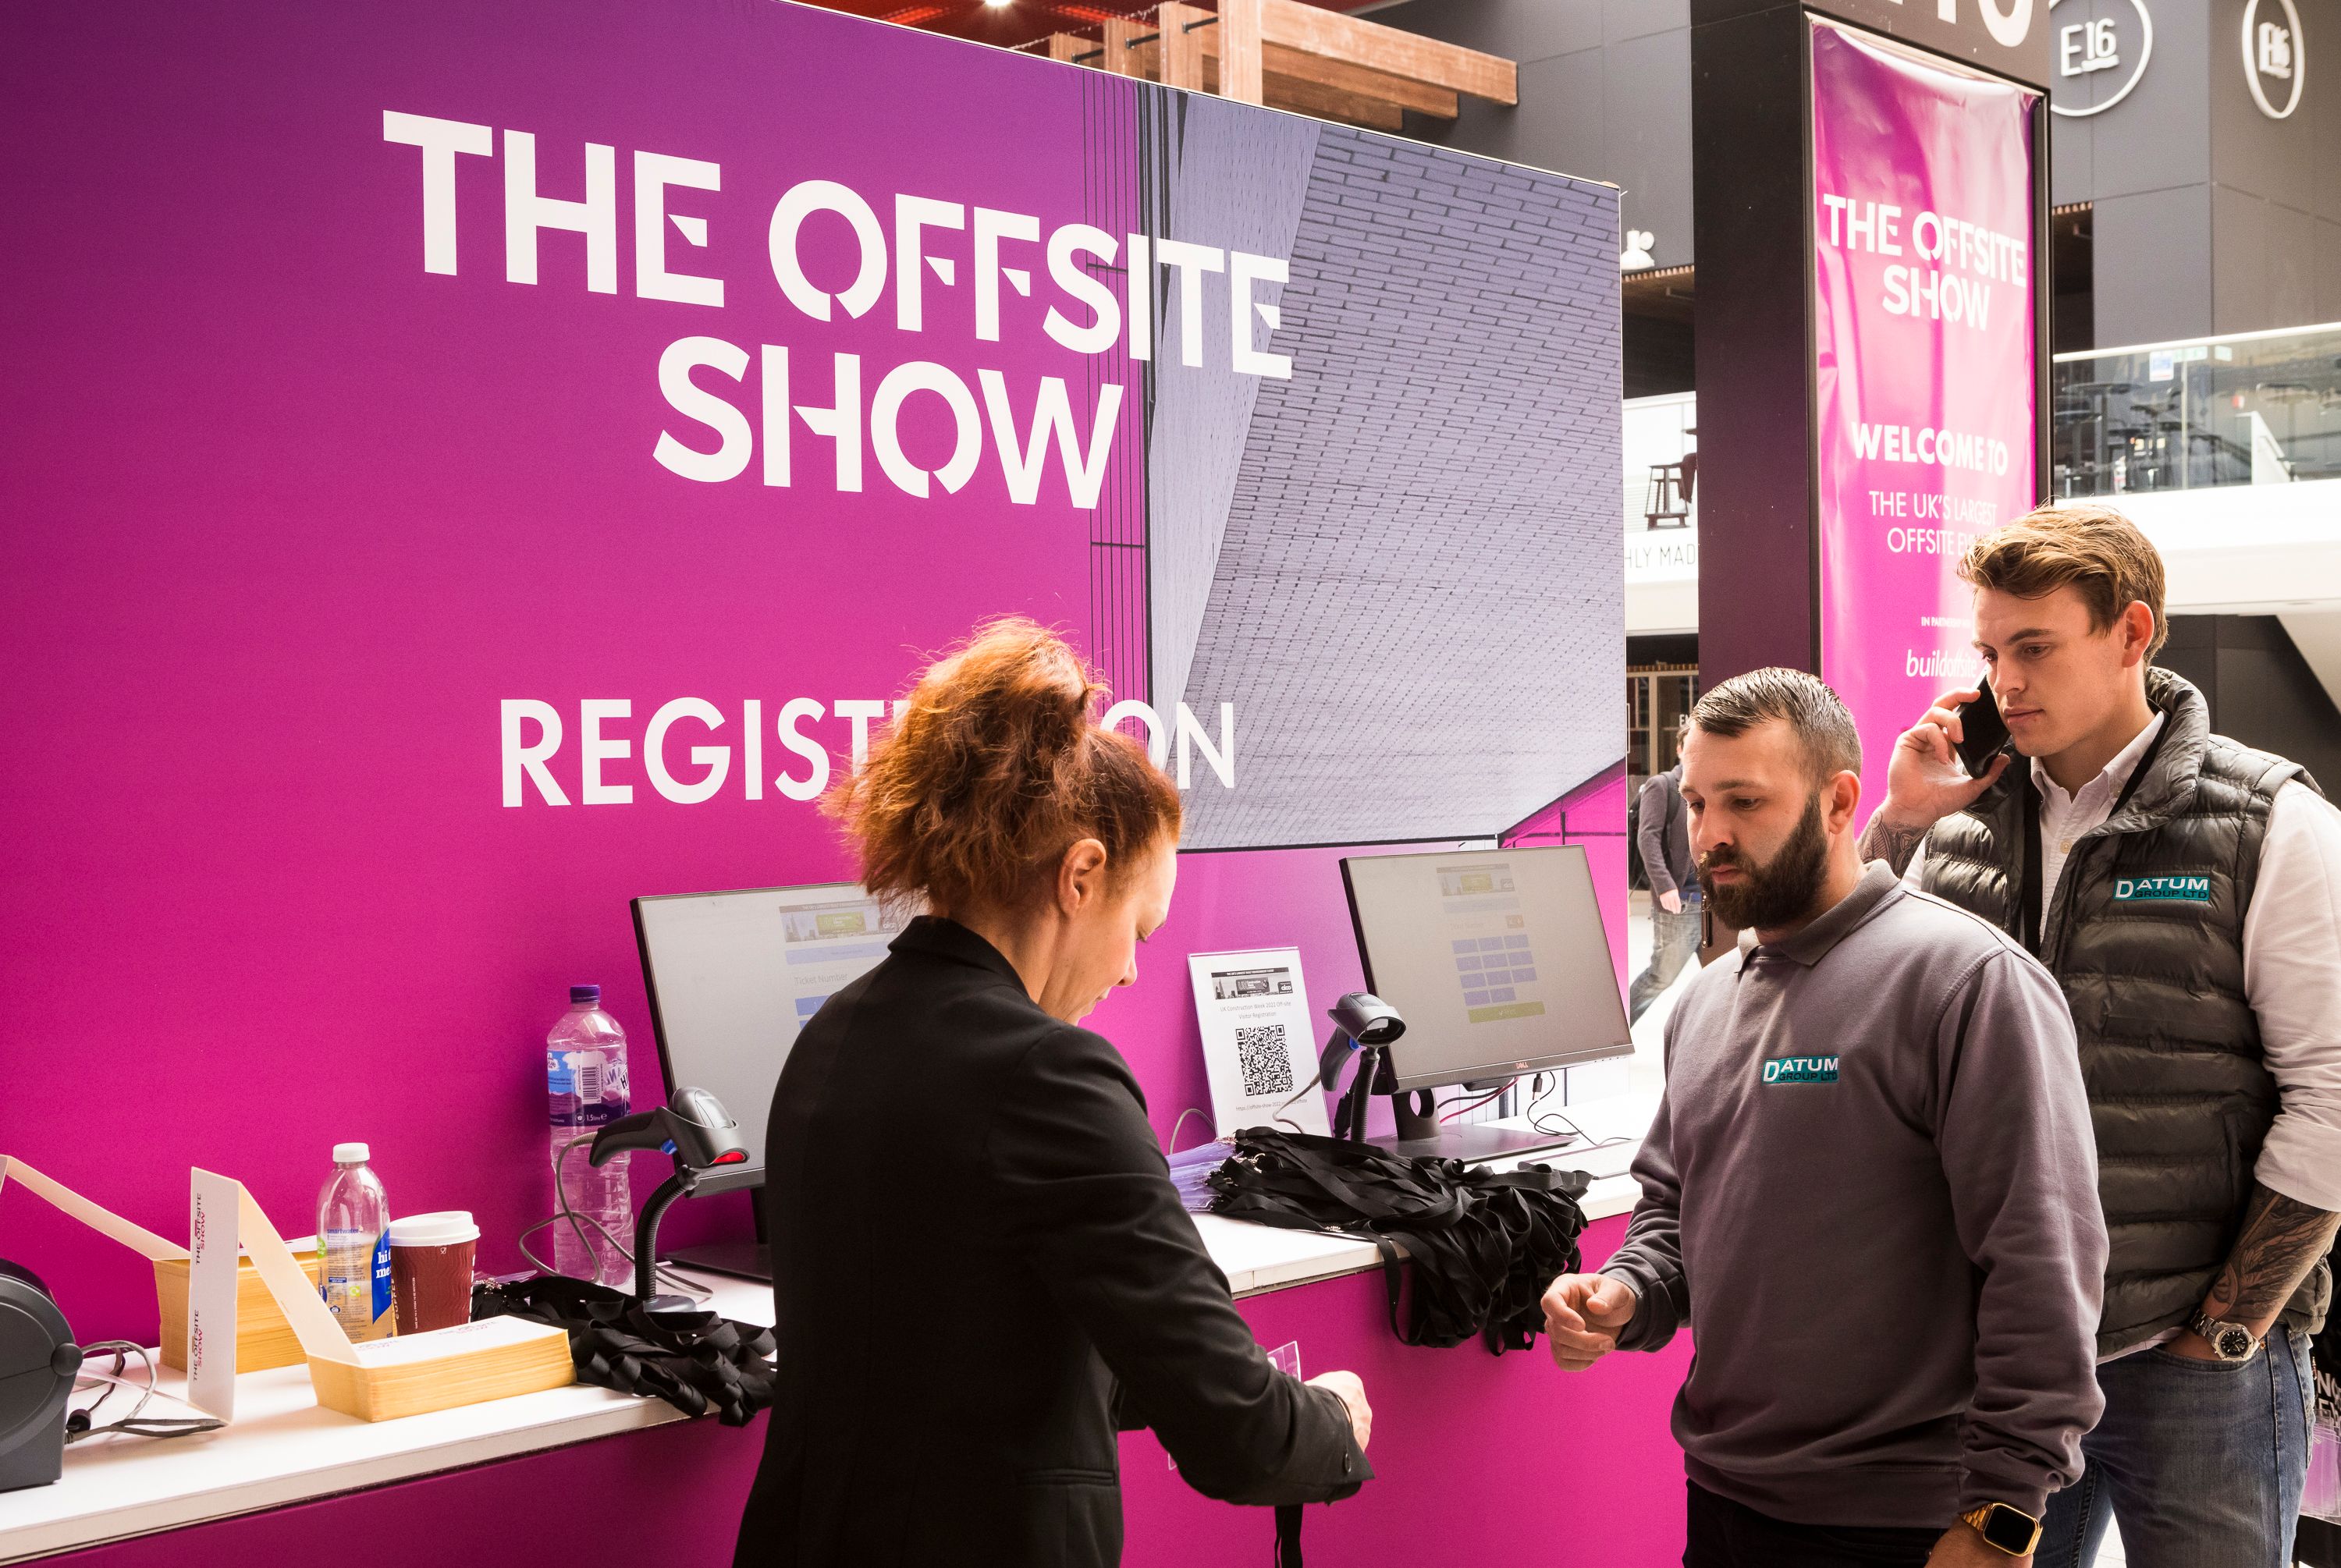 The Offsite Show (7-9 May)